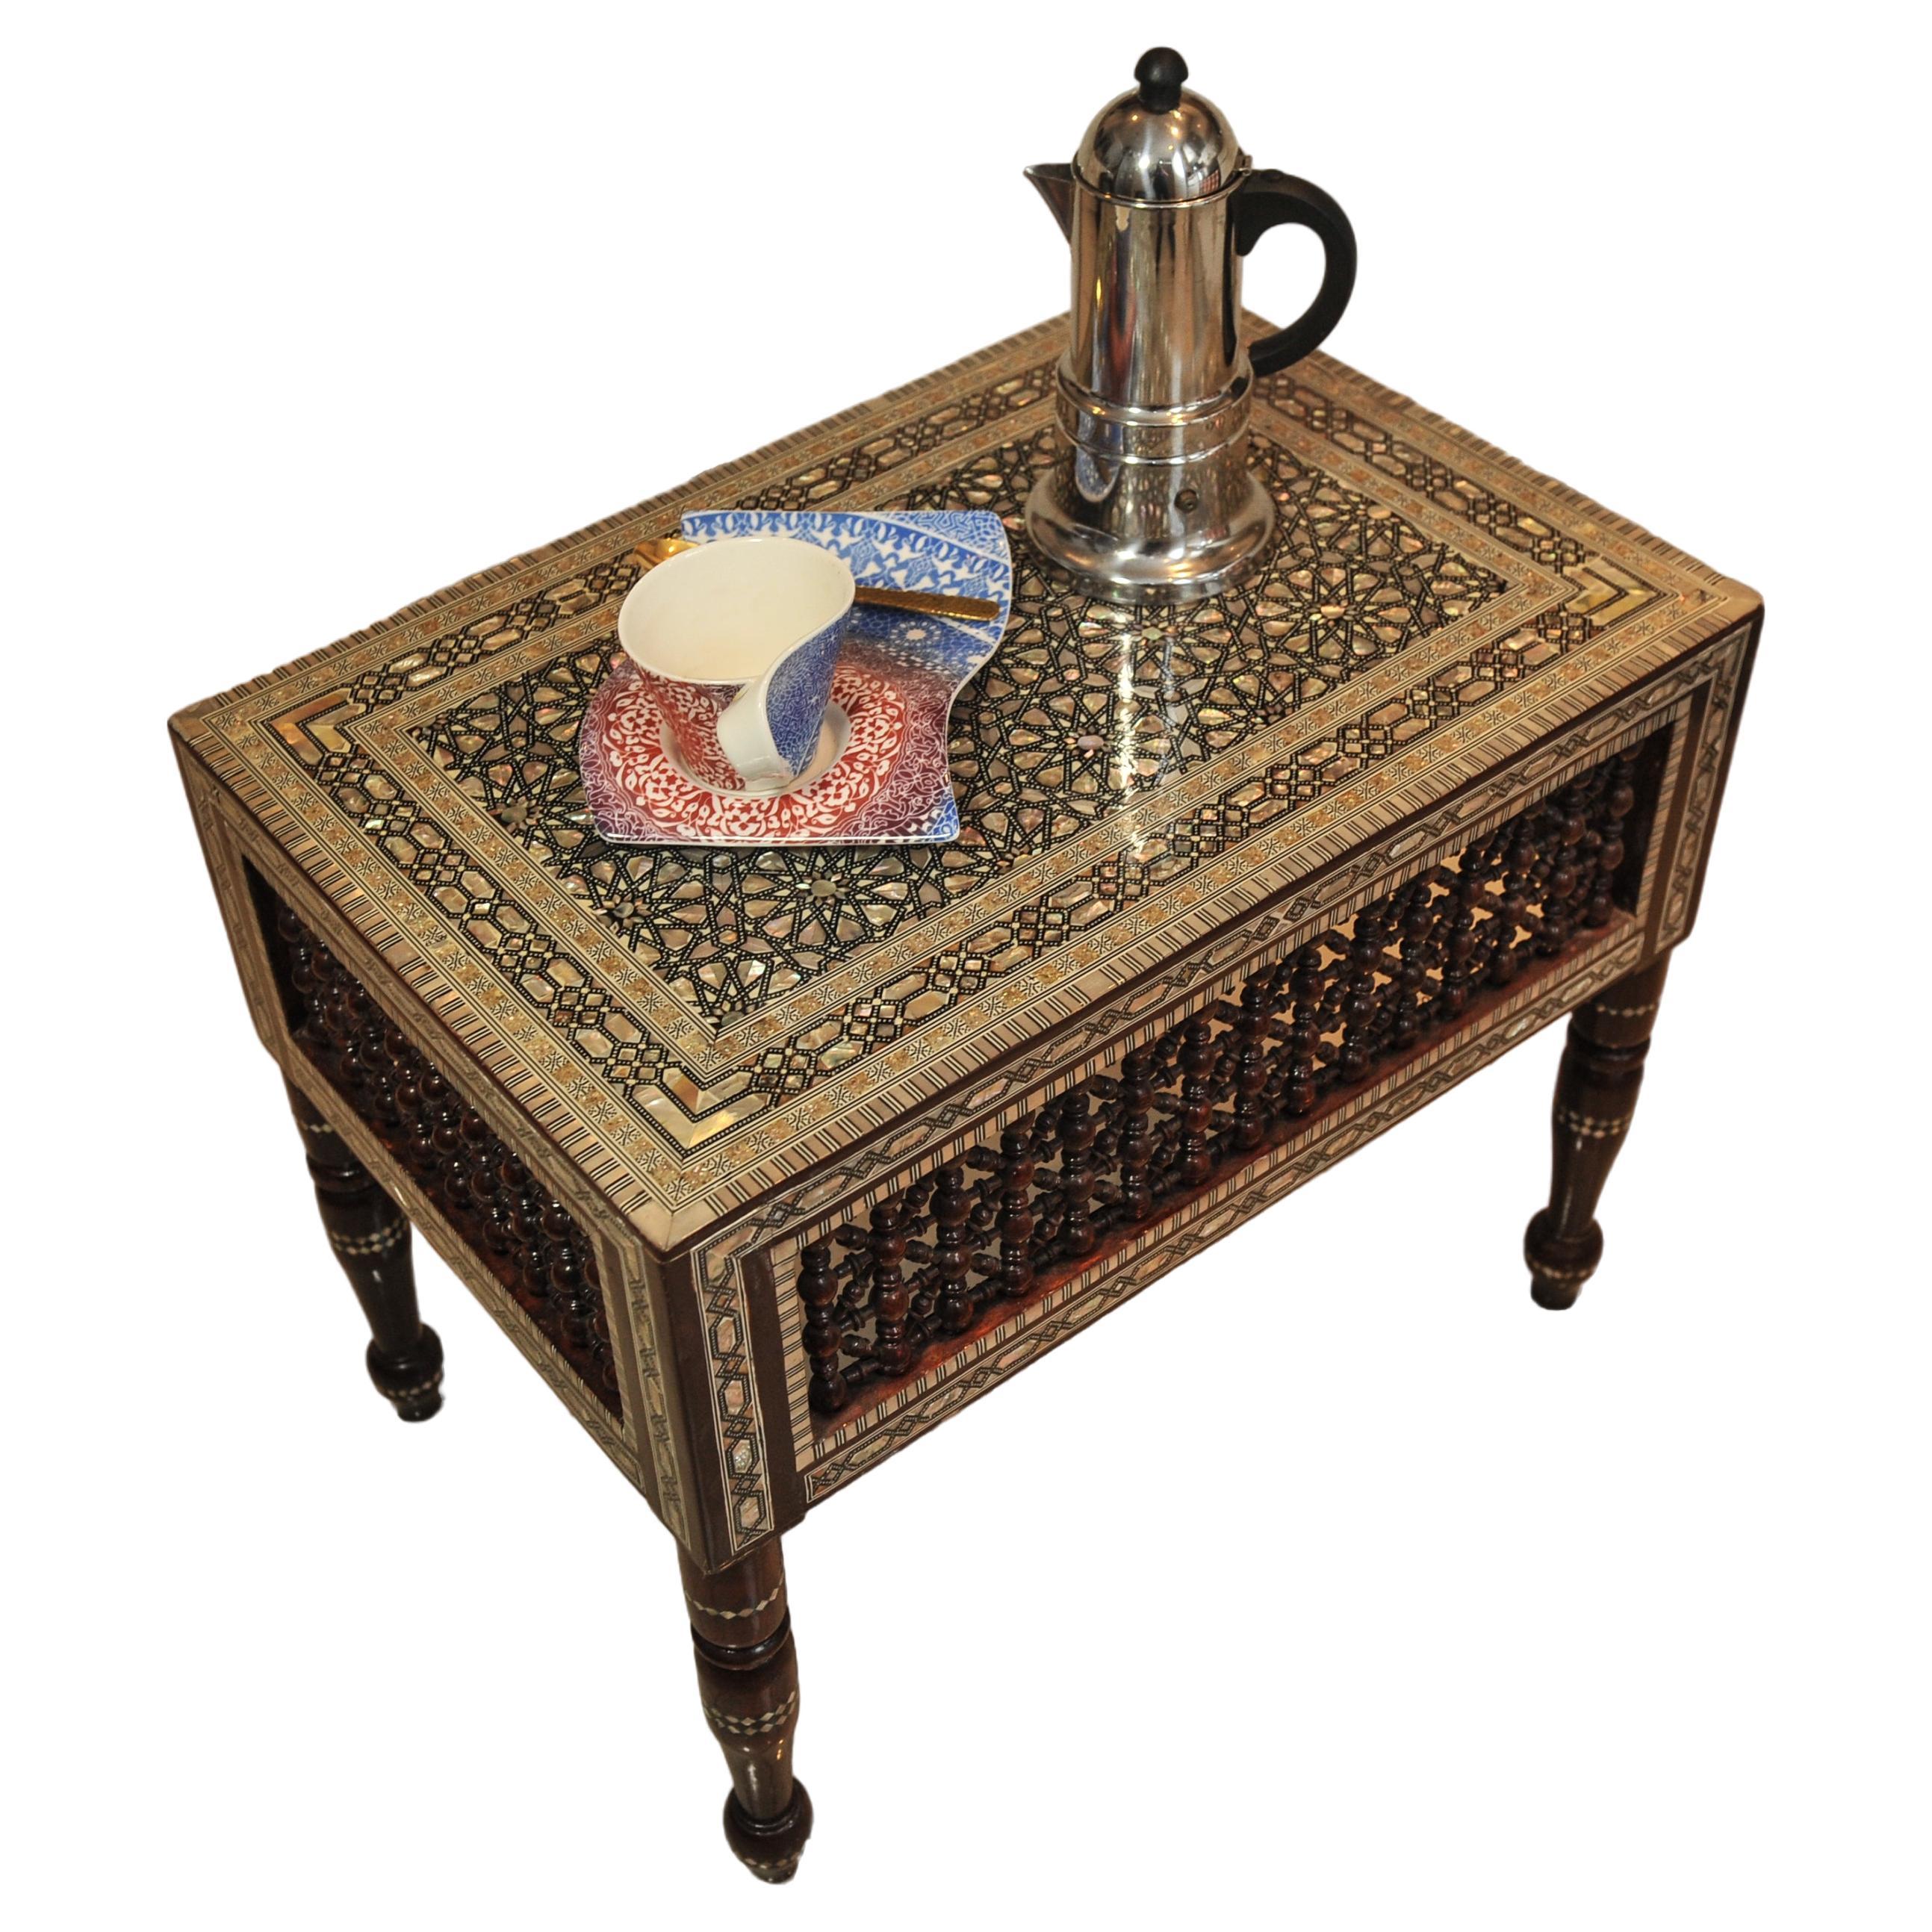 Damascene Moorish Decorative Inlay Tea Table With Matching Wall Mirror 
Featuring A Repetitive Khatam Marquetry of Geometric Decorative Patterns 1910's

Mirror
Height 85.5cm
Width 56.5cm
Depth 3cm 

Table
Height 51cm
Width 61cm
Depth 45.5cm
